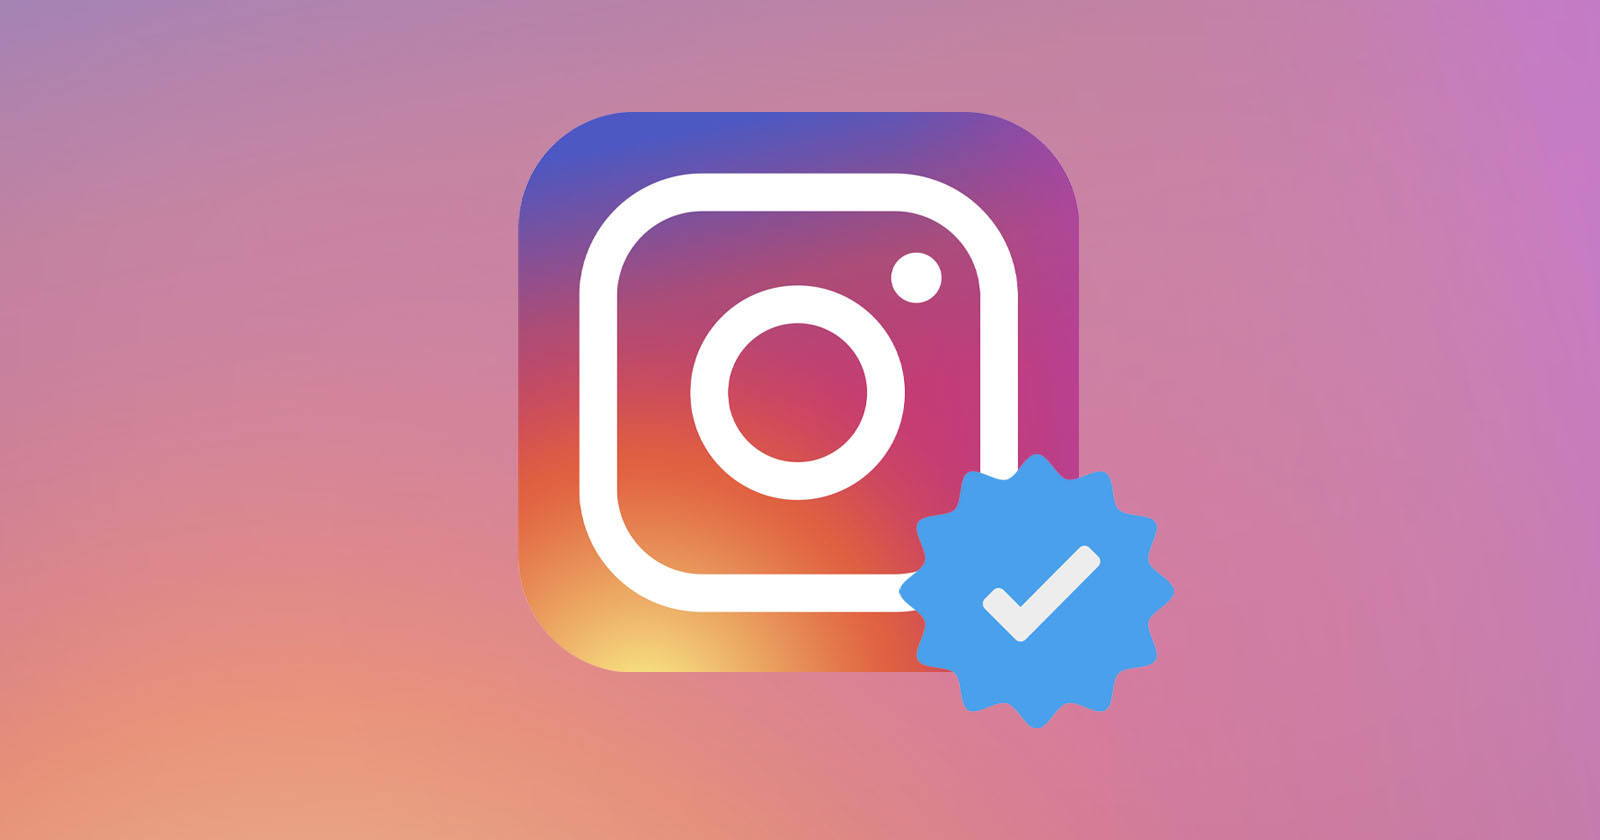 Instagram May Be Considering a Paid Subscription Plan with a Blue Badge